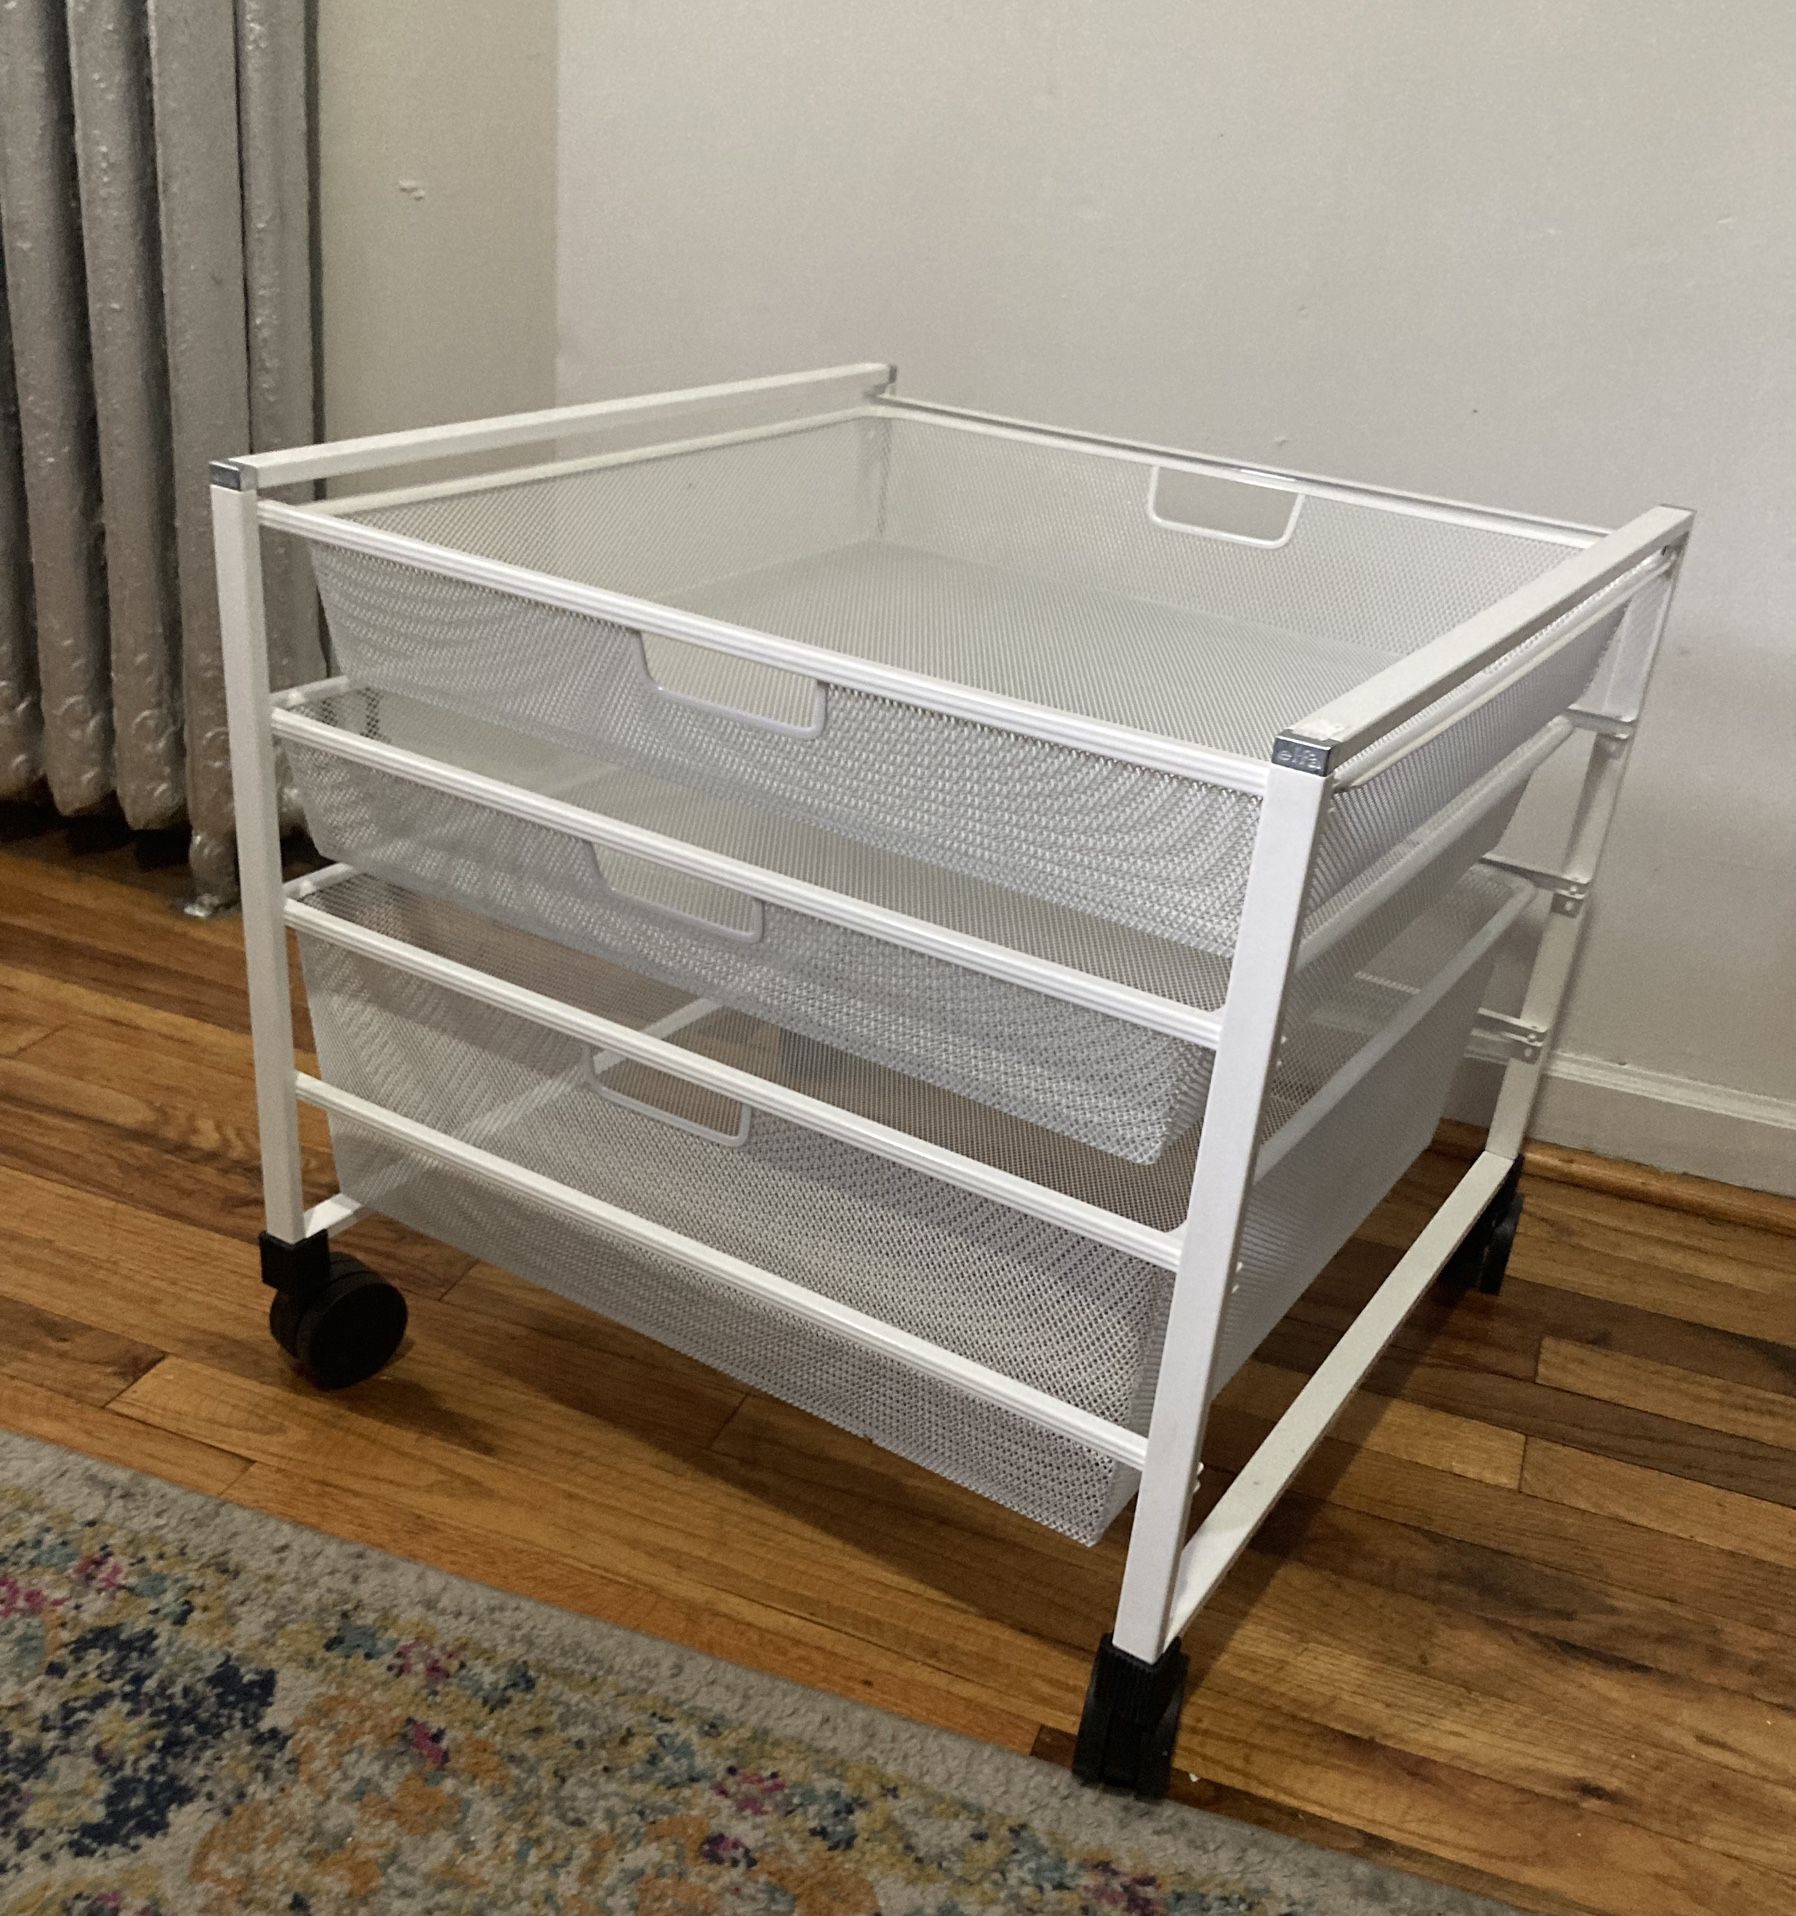 Container Store Elfa White Mesh Rolling Cart with Drawers